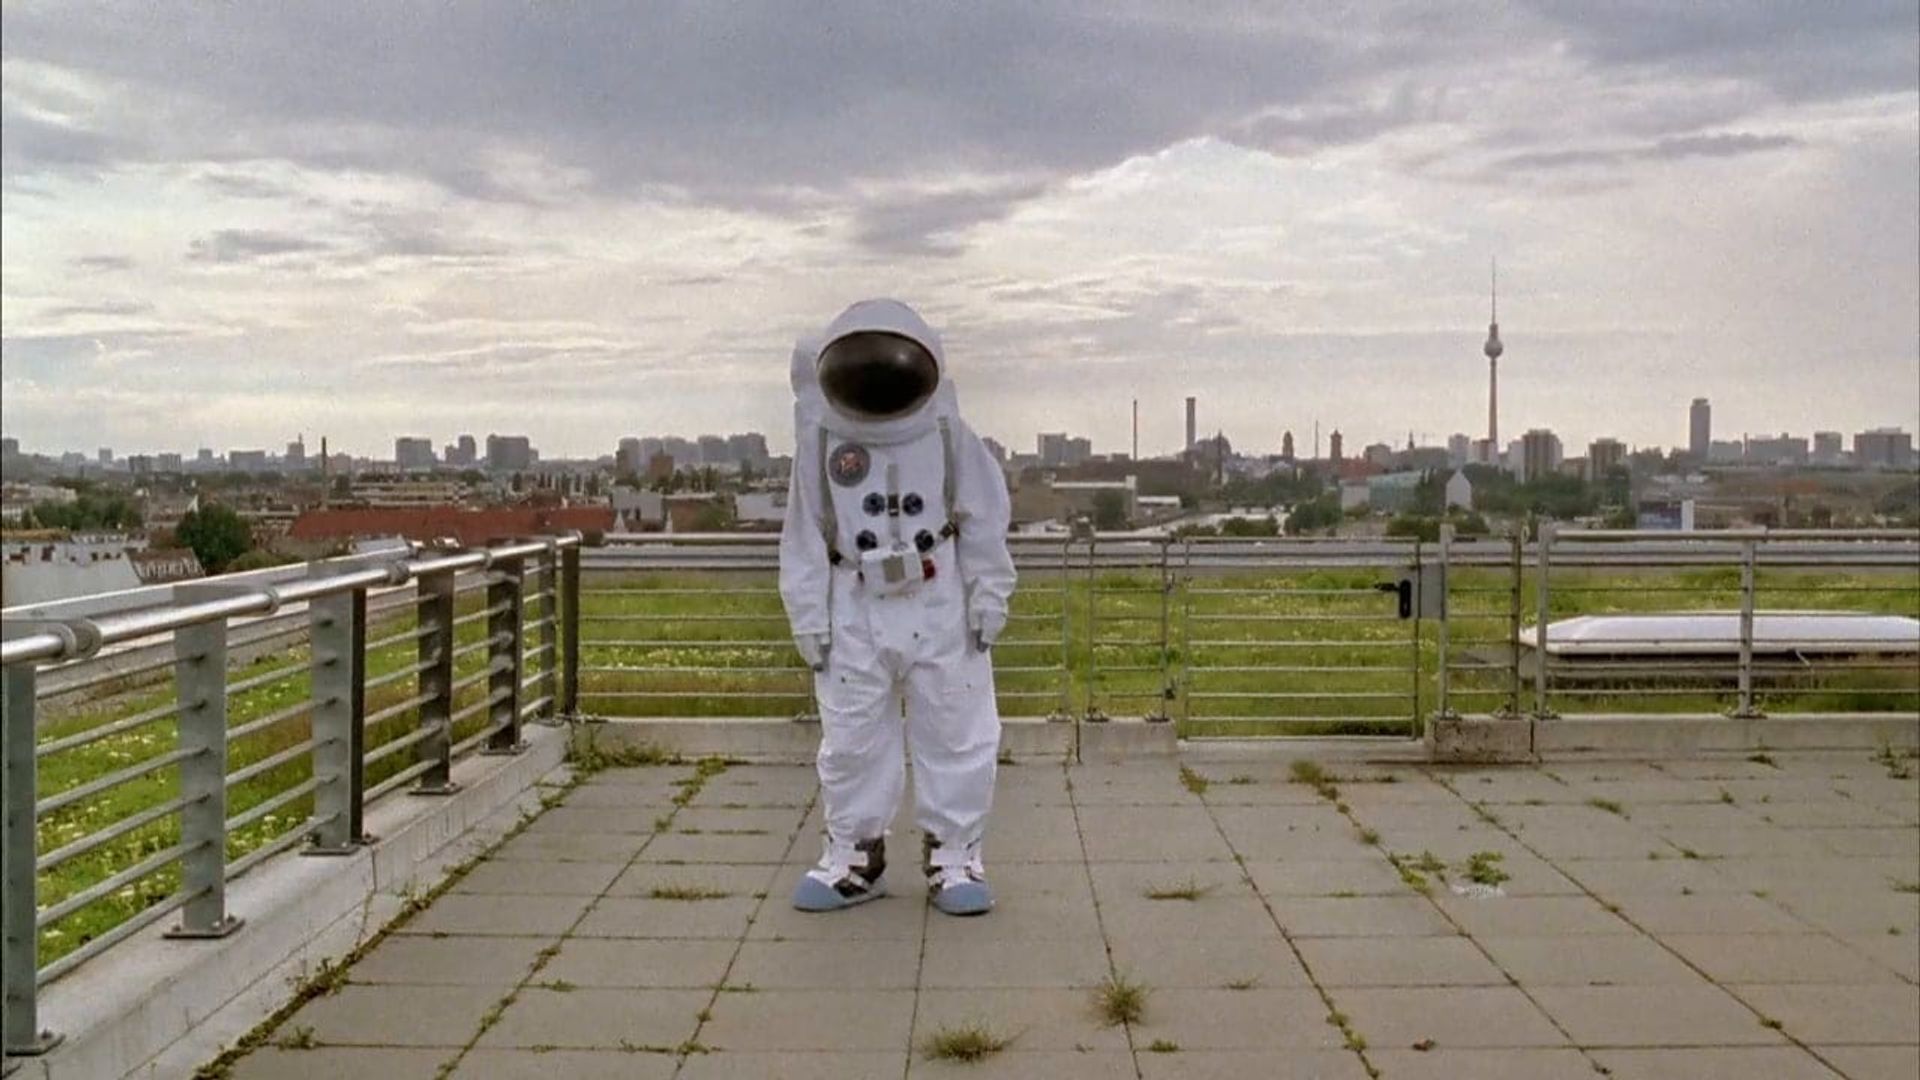 The Astronaut on the Roof background